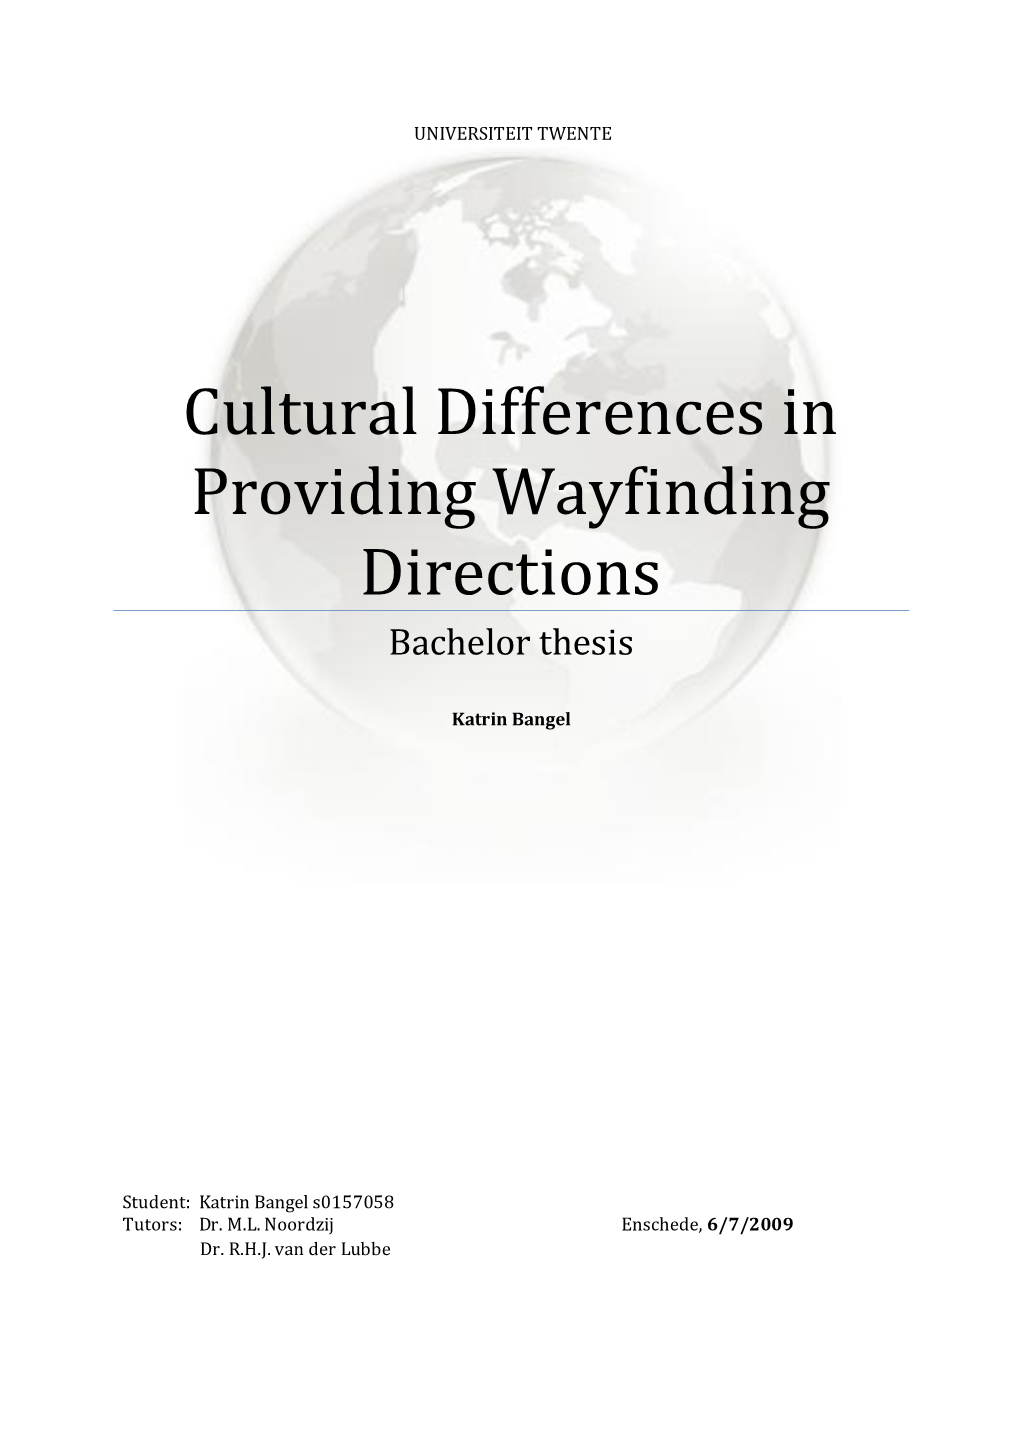 Cultural Differences in Providing Wayfinding Directions Bachelor Thesis